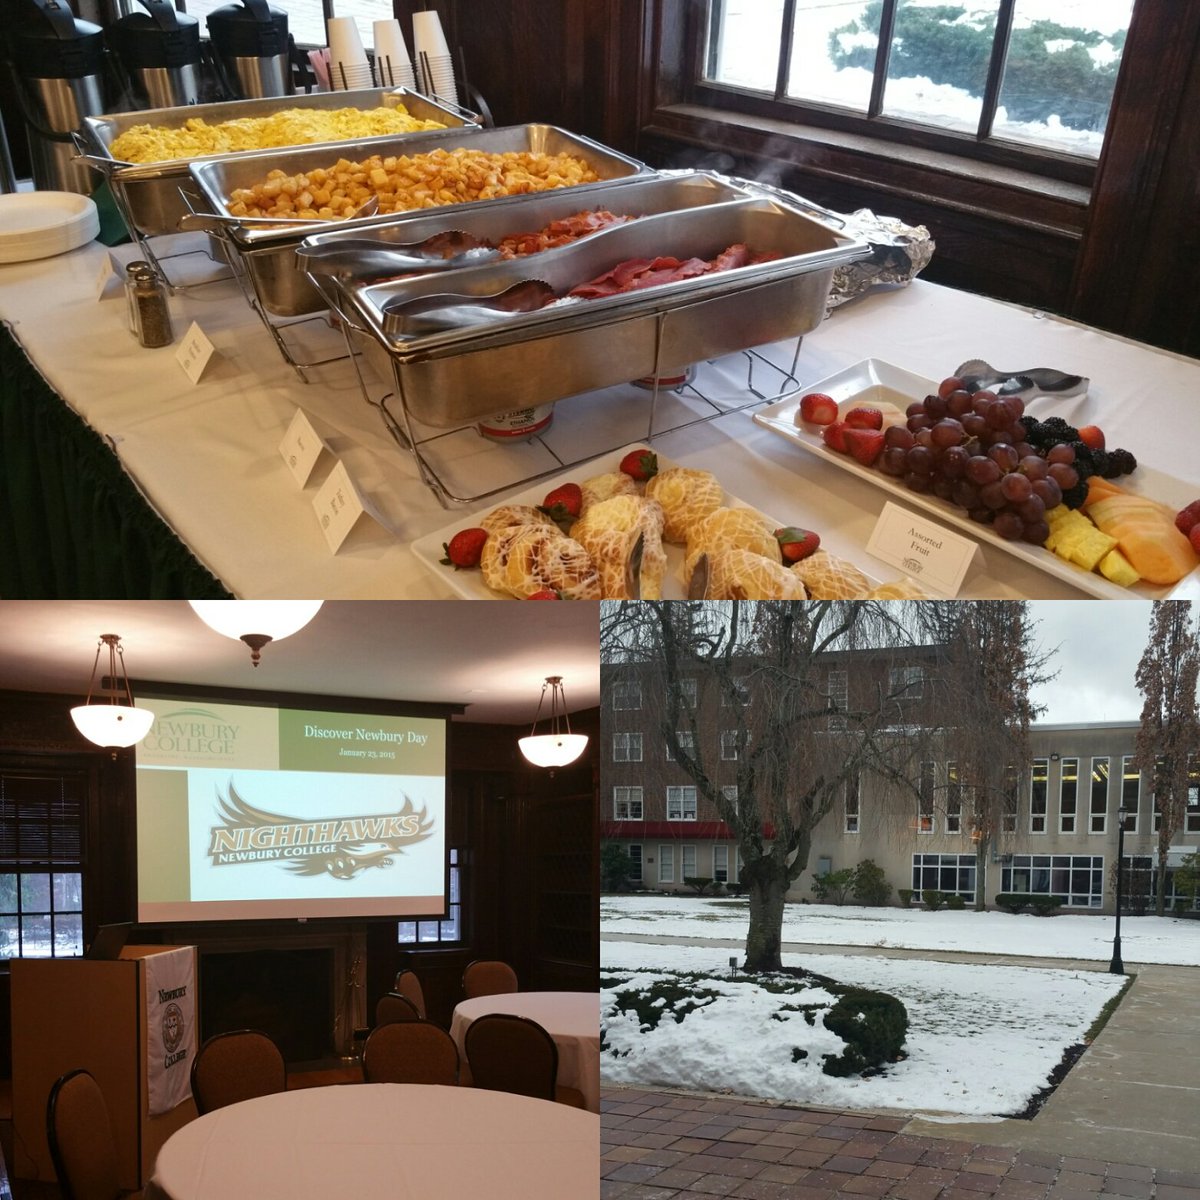 Our admissions dept puts together an amazing spread for their events! No snow yet #discovernewbury #futurenighthawks